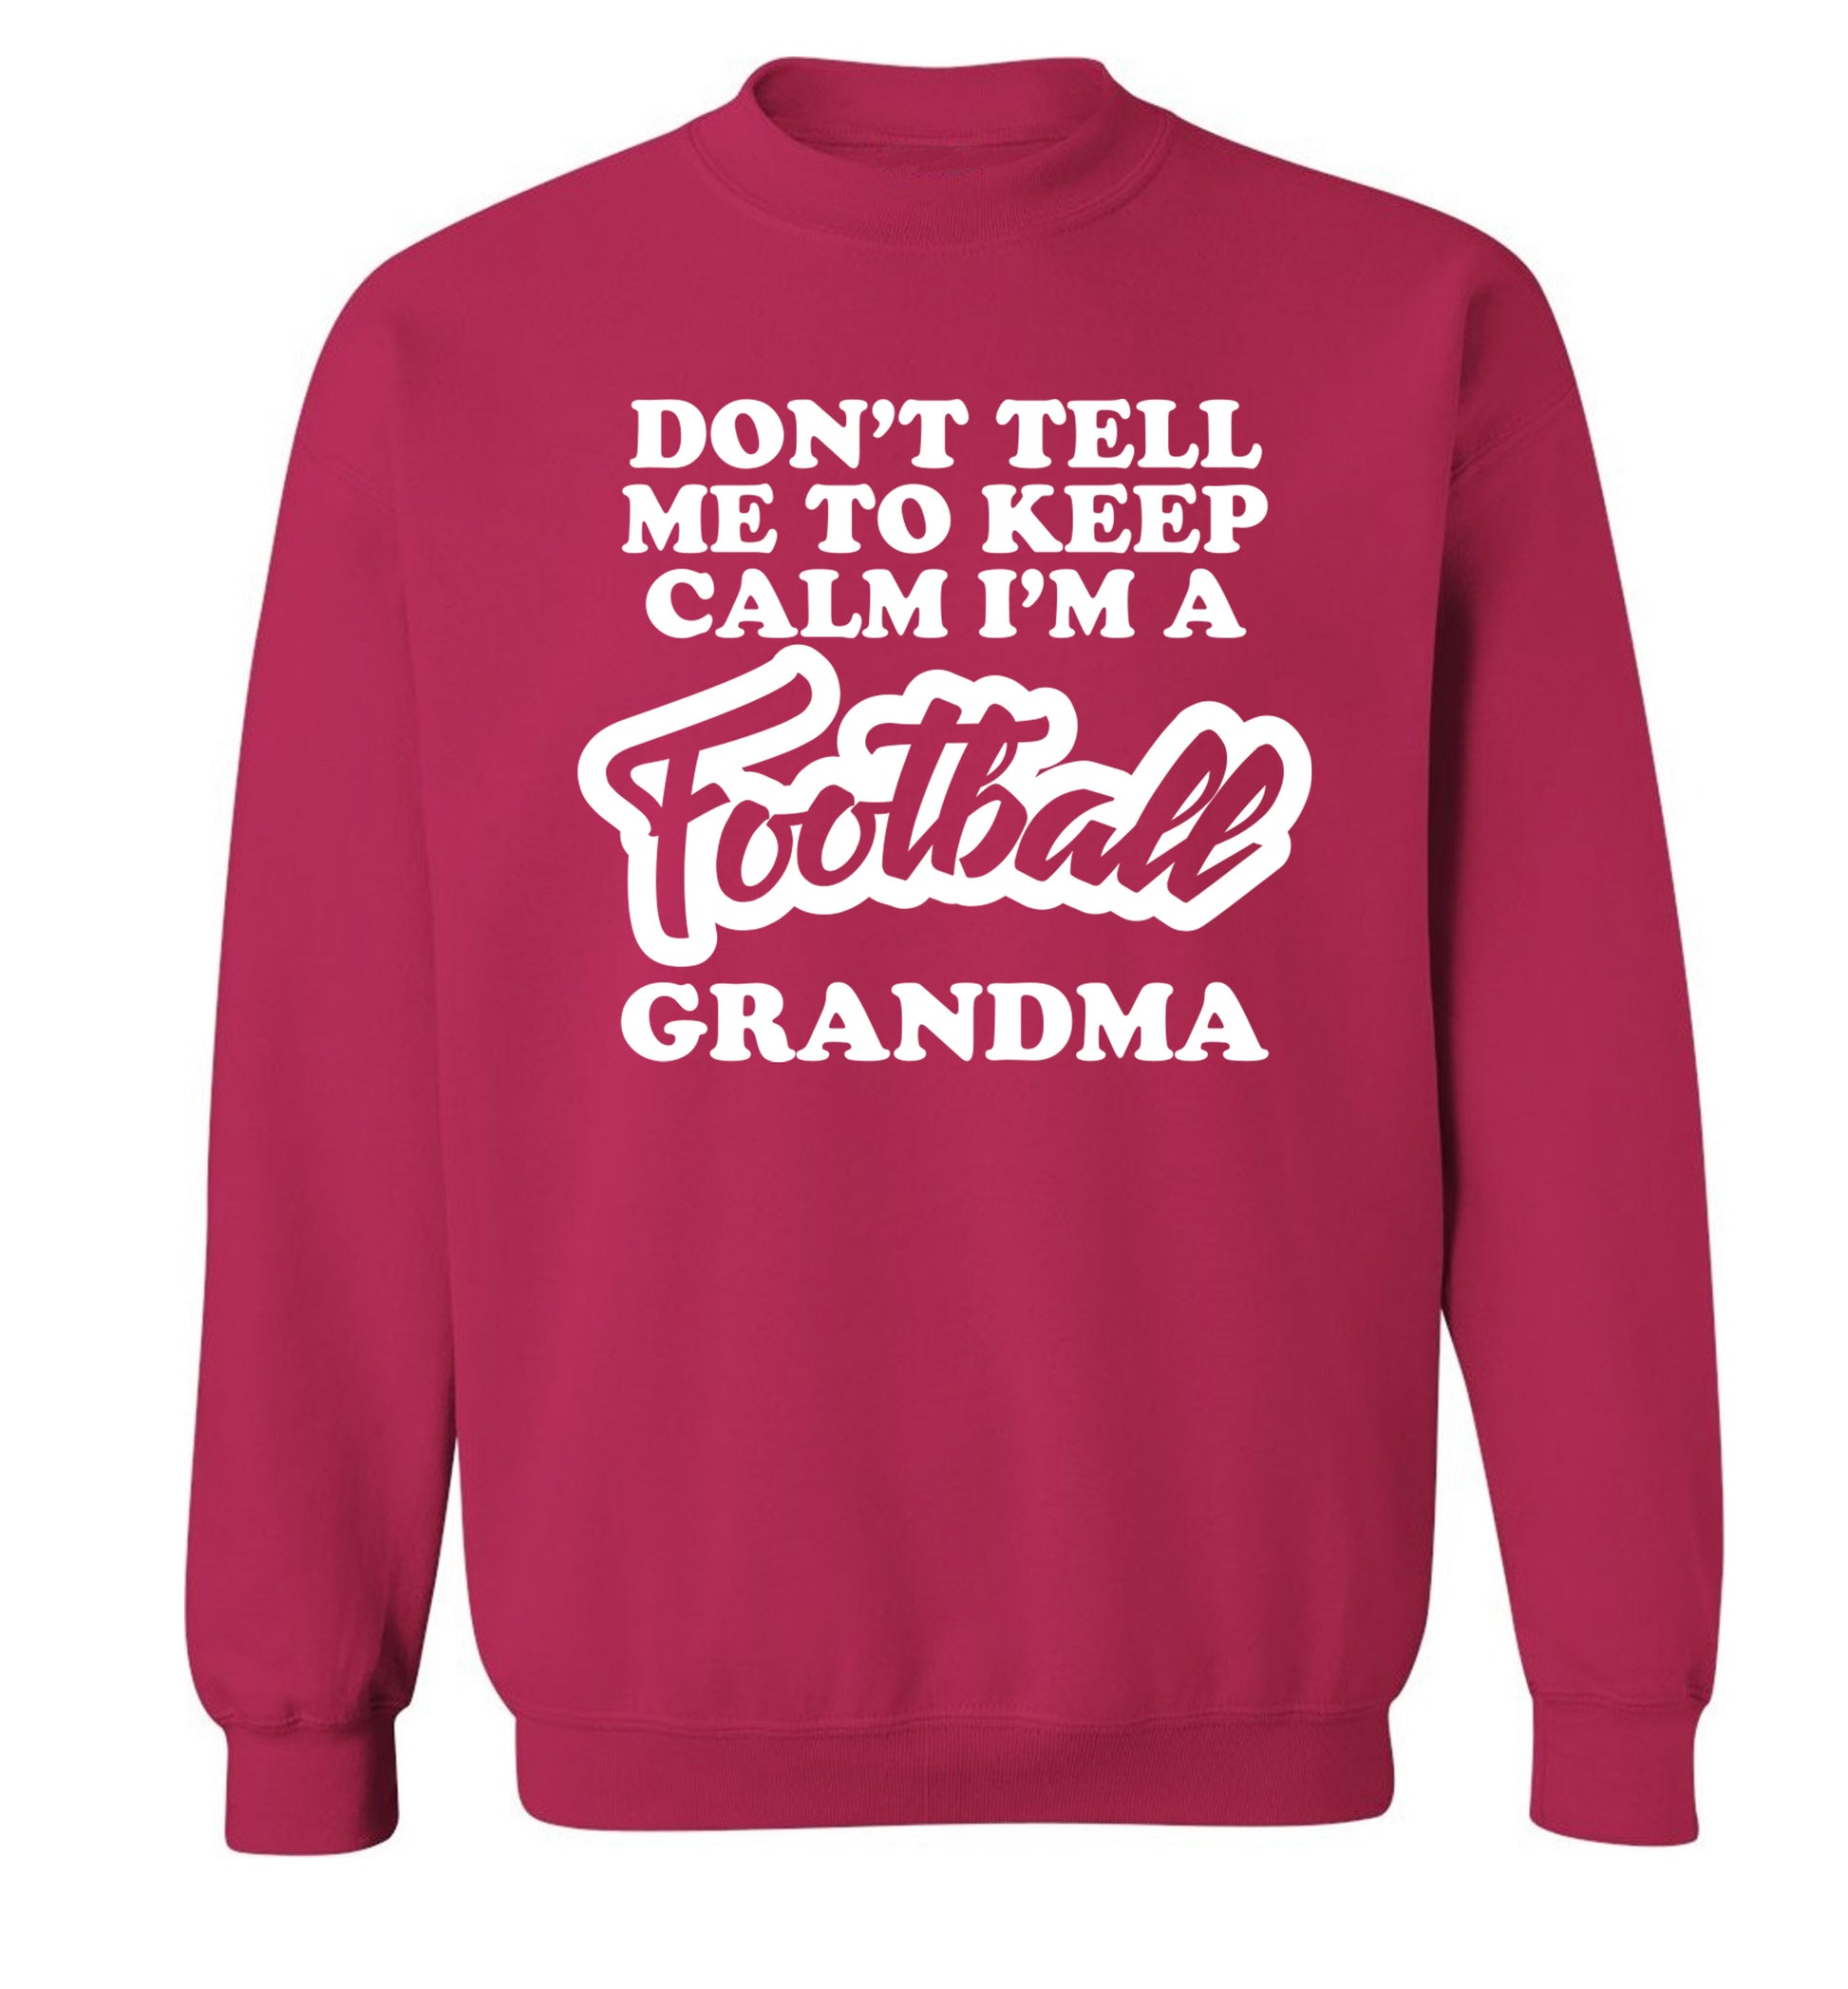 Don't tell me to keep calm I'm a football grandma Adult's unisexpink Sweater 2XL